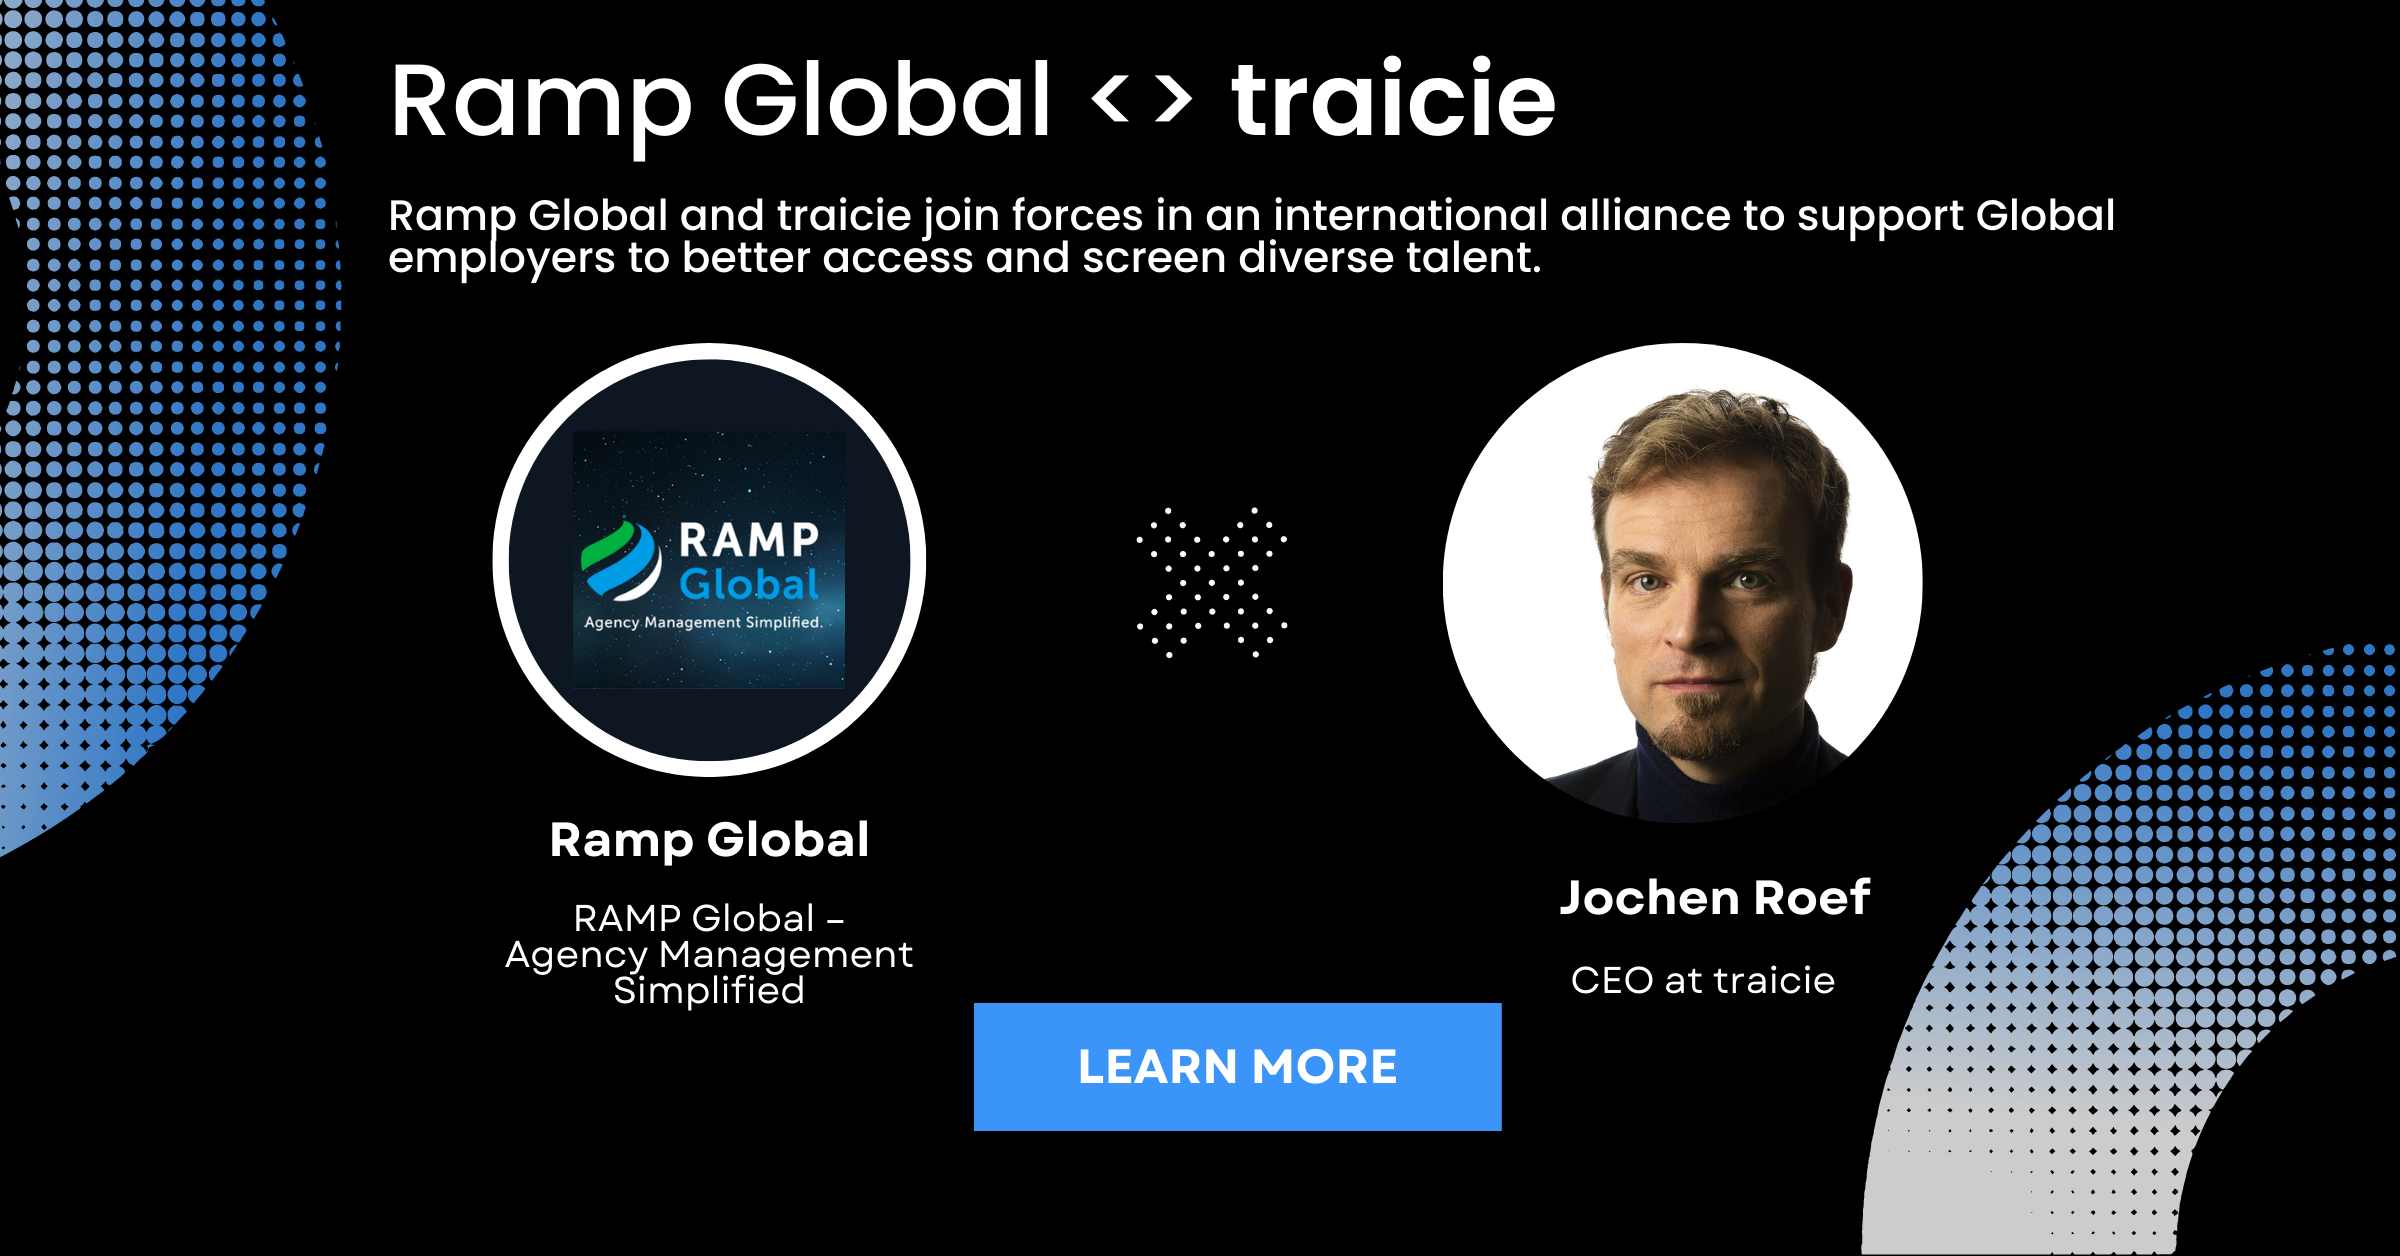 Ramp Global <> traicie support recruiters to better screen diverse talent.